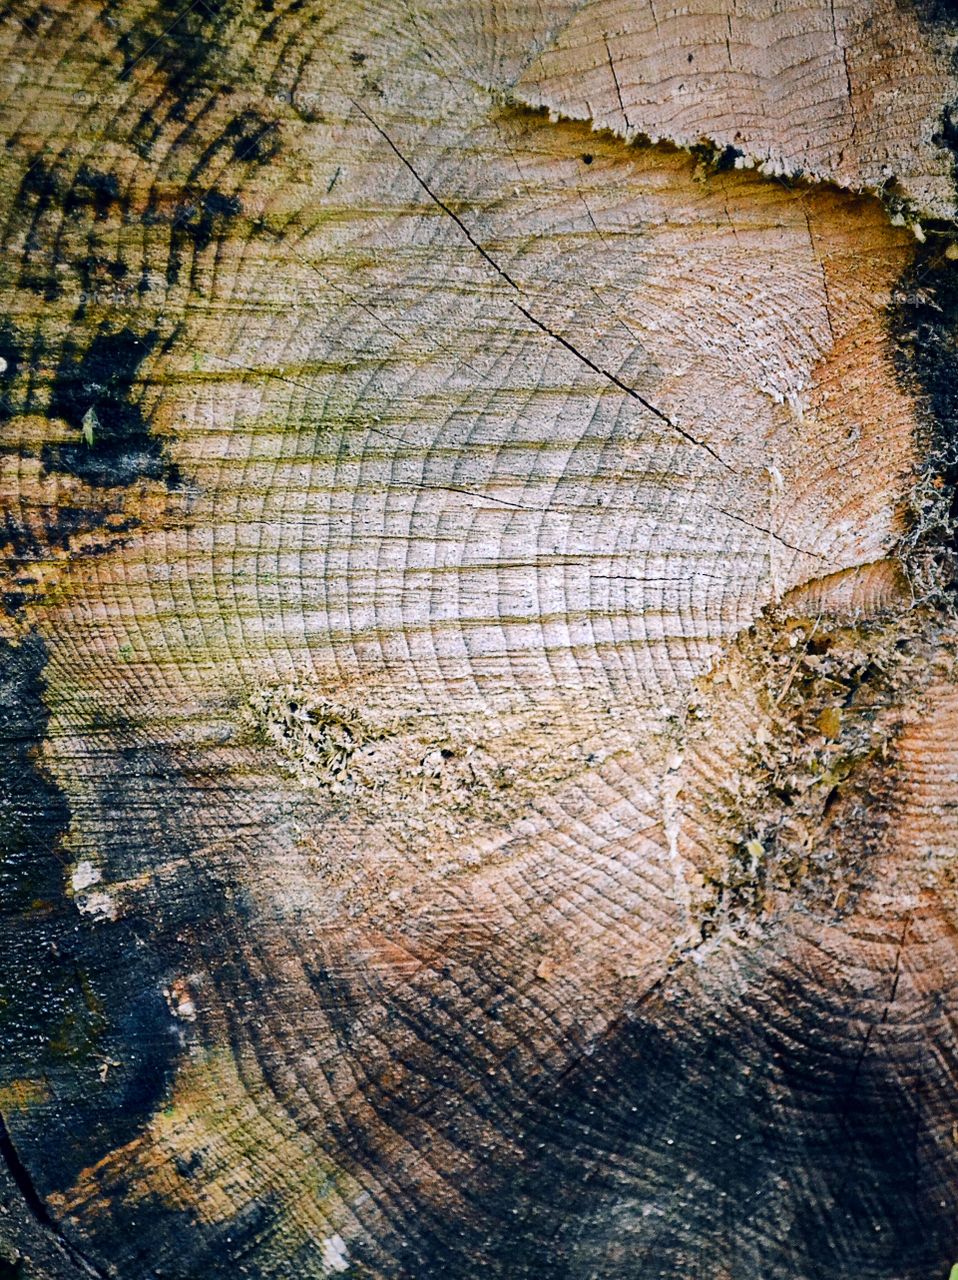 Extreme close-up of tree trunk